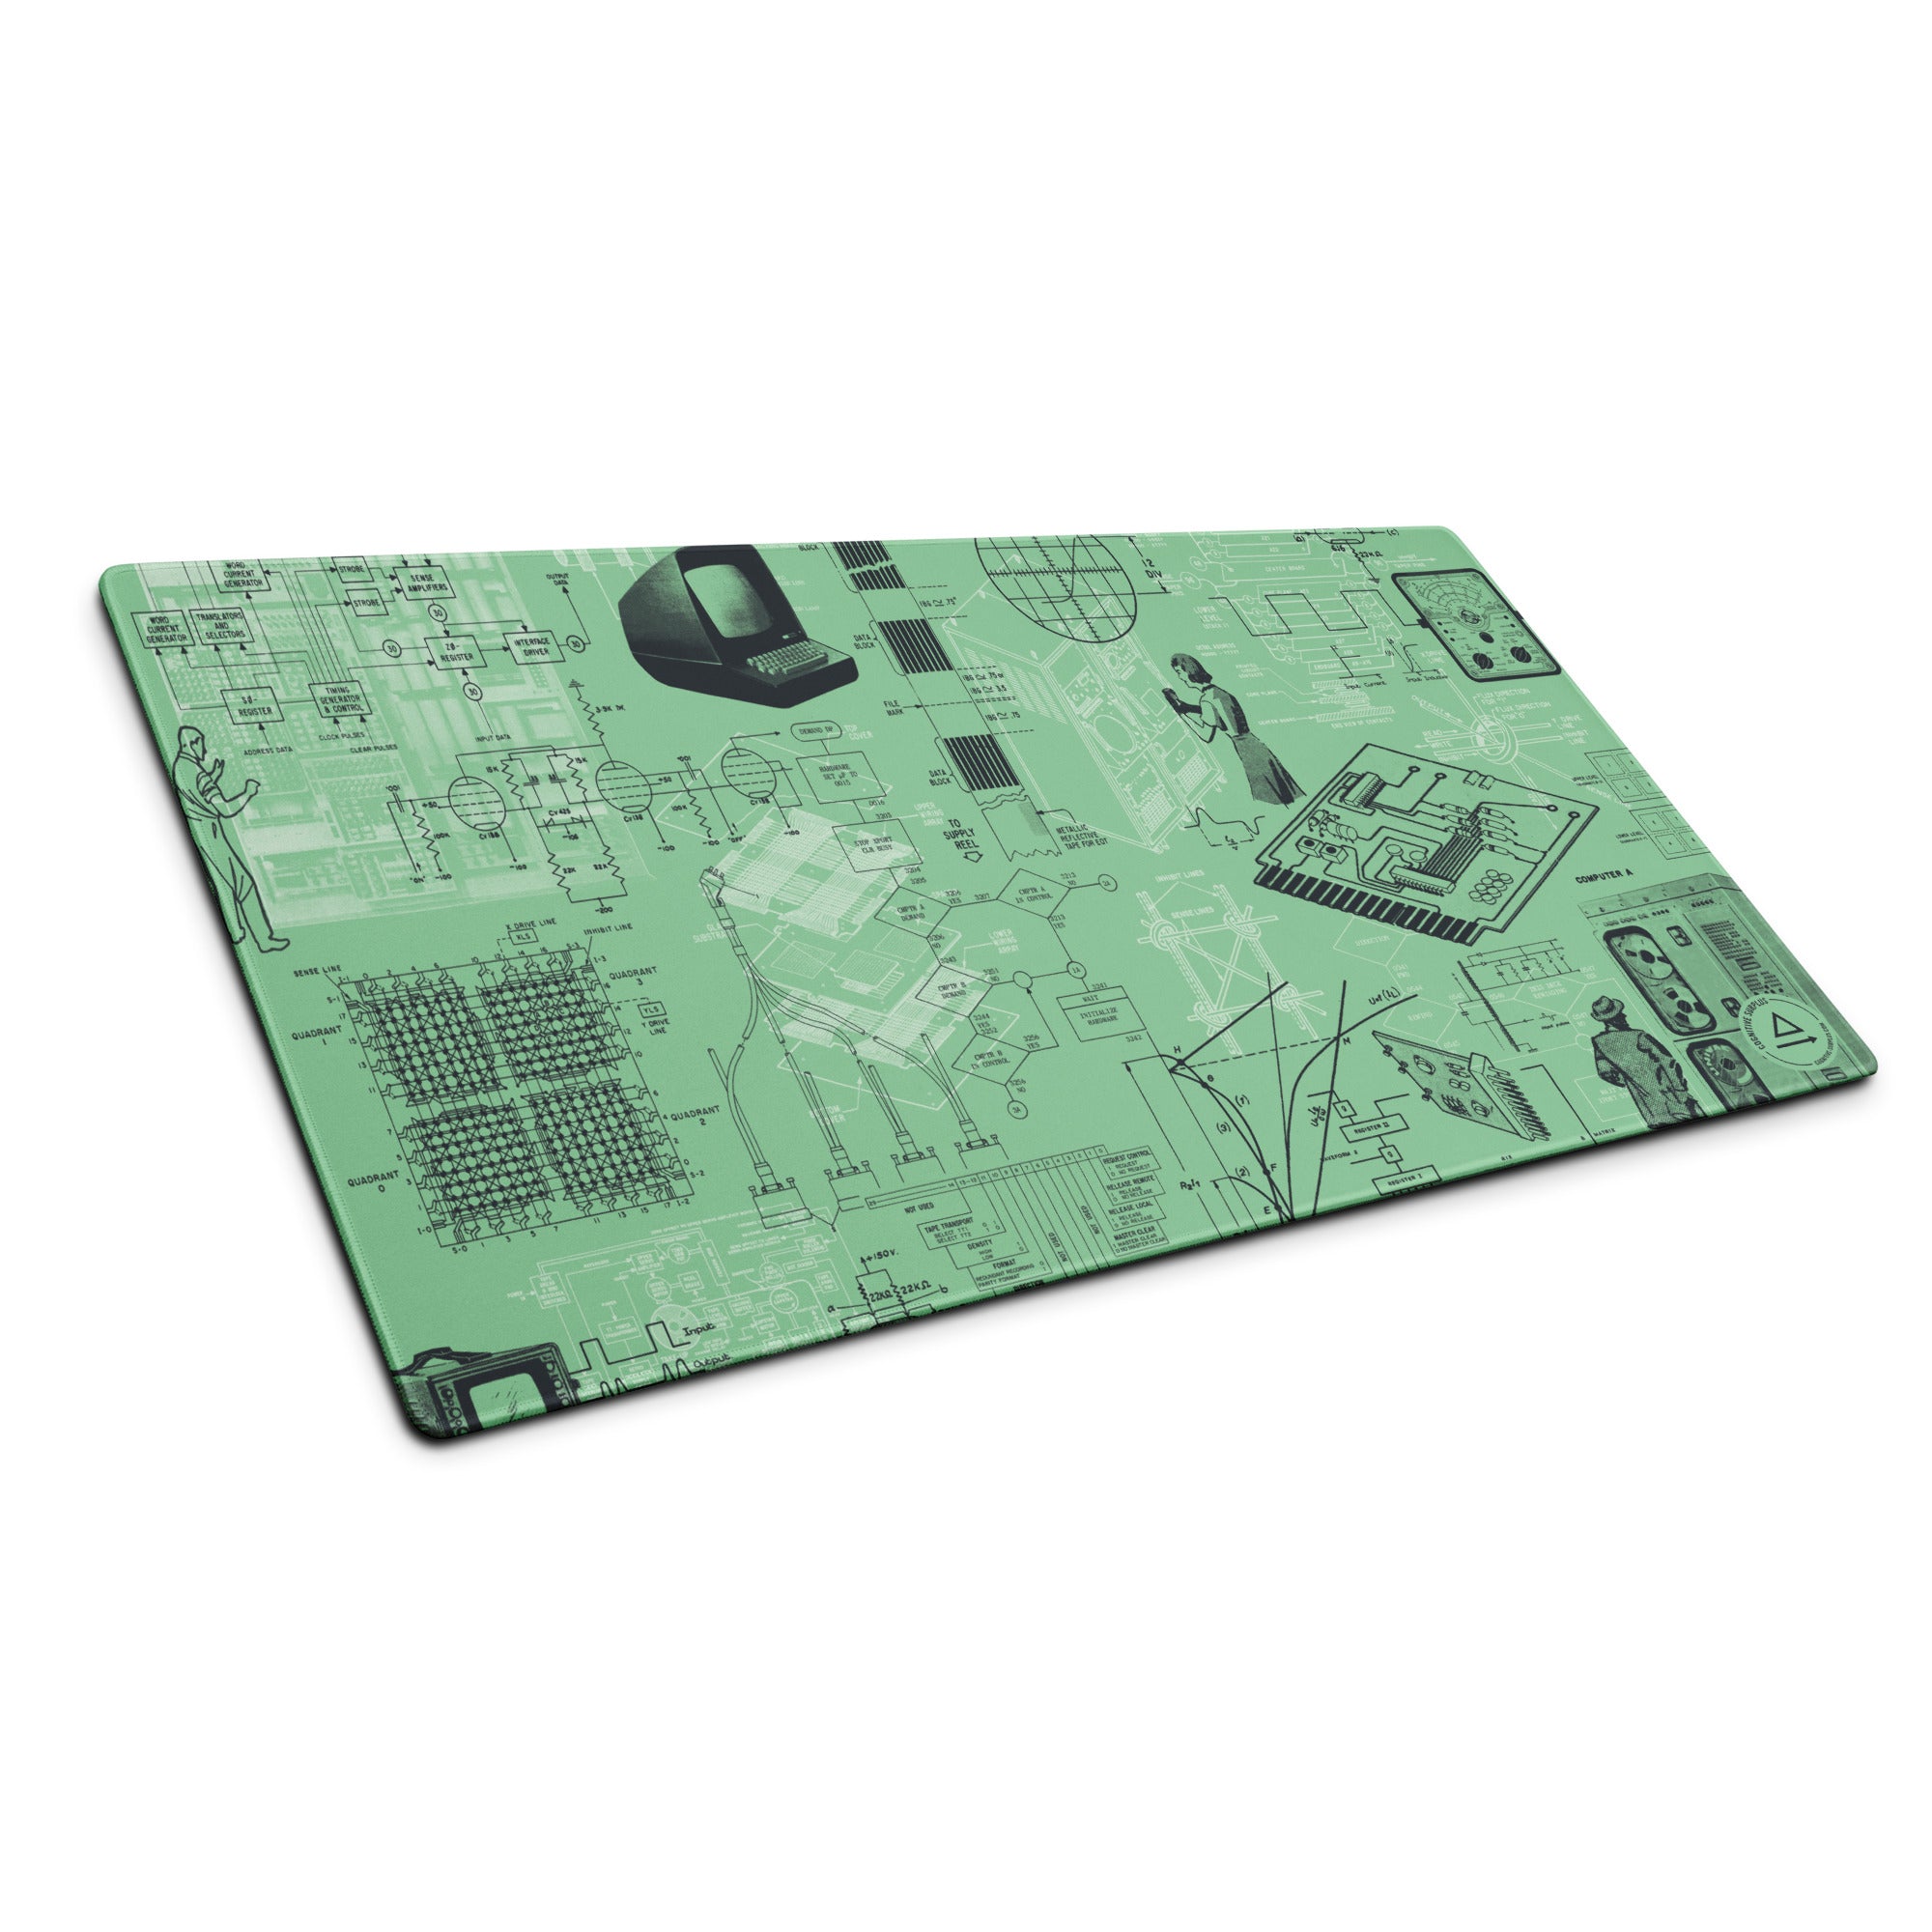 gaming-mouse-pad-white-36x18-front-6595e7689a790.jpg